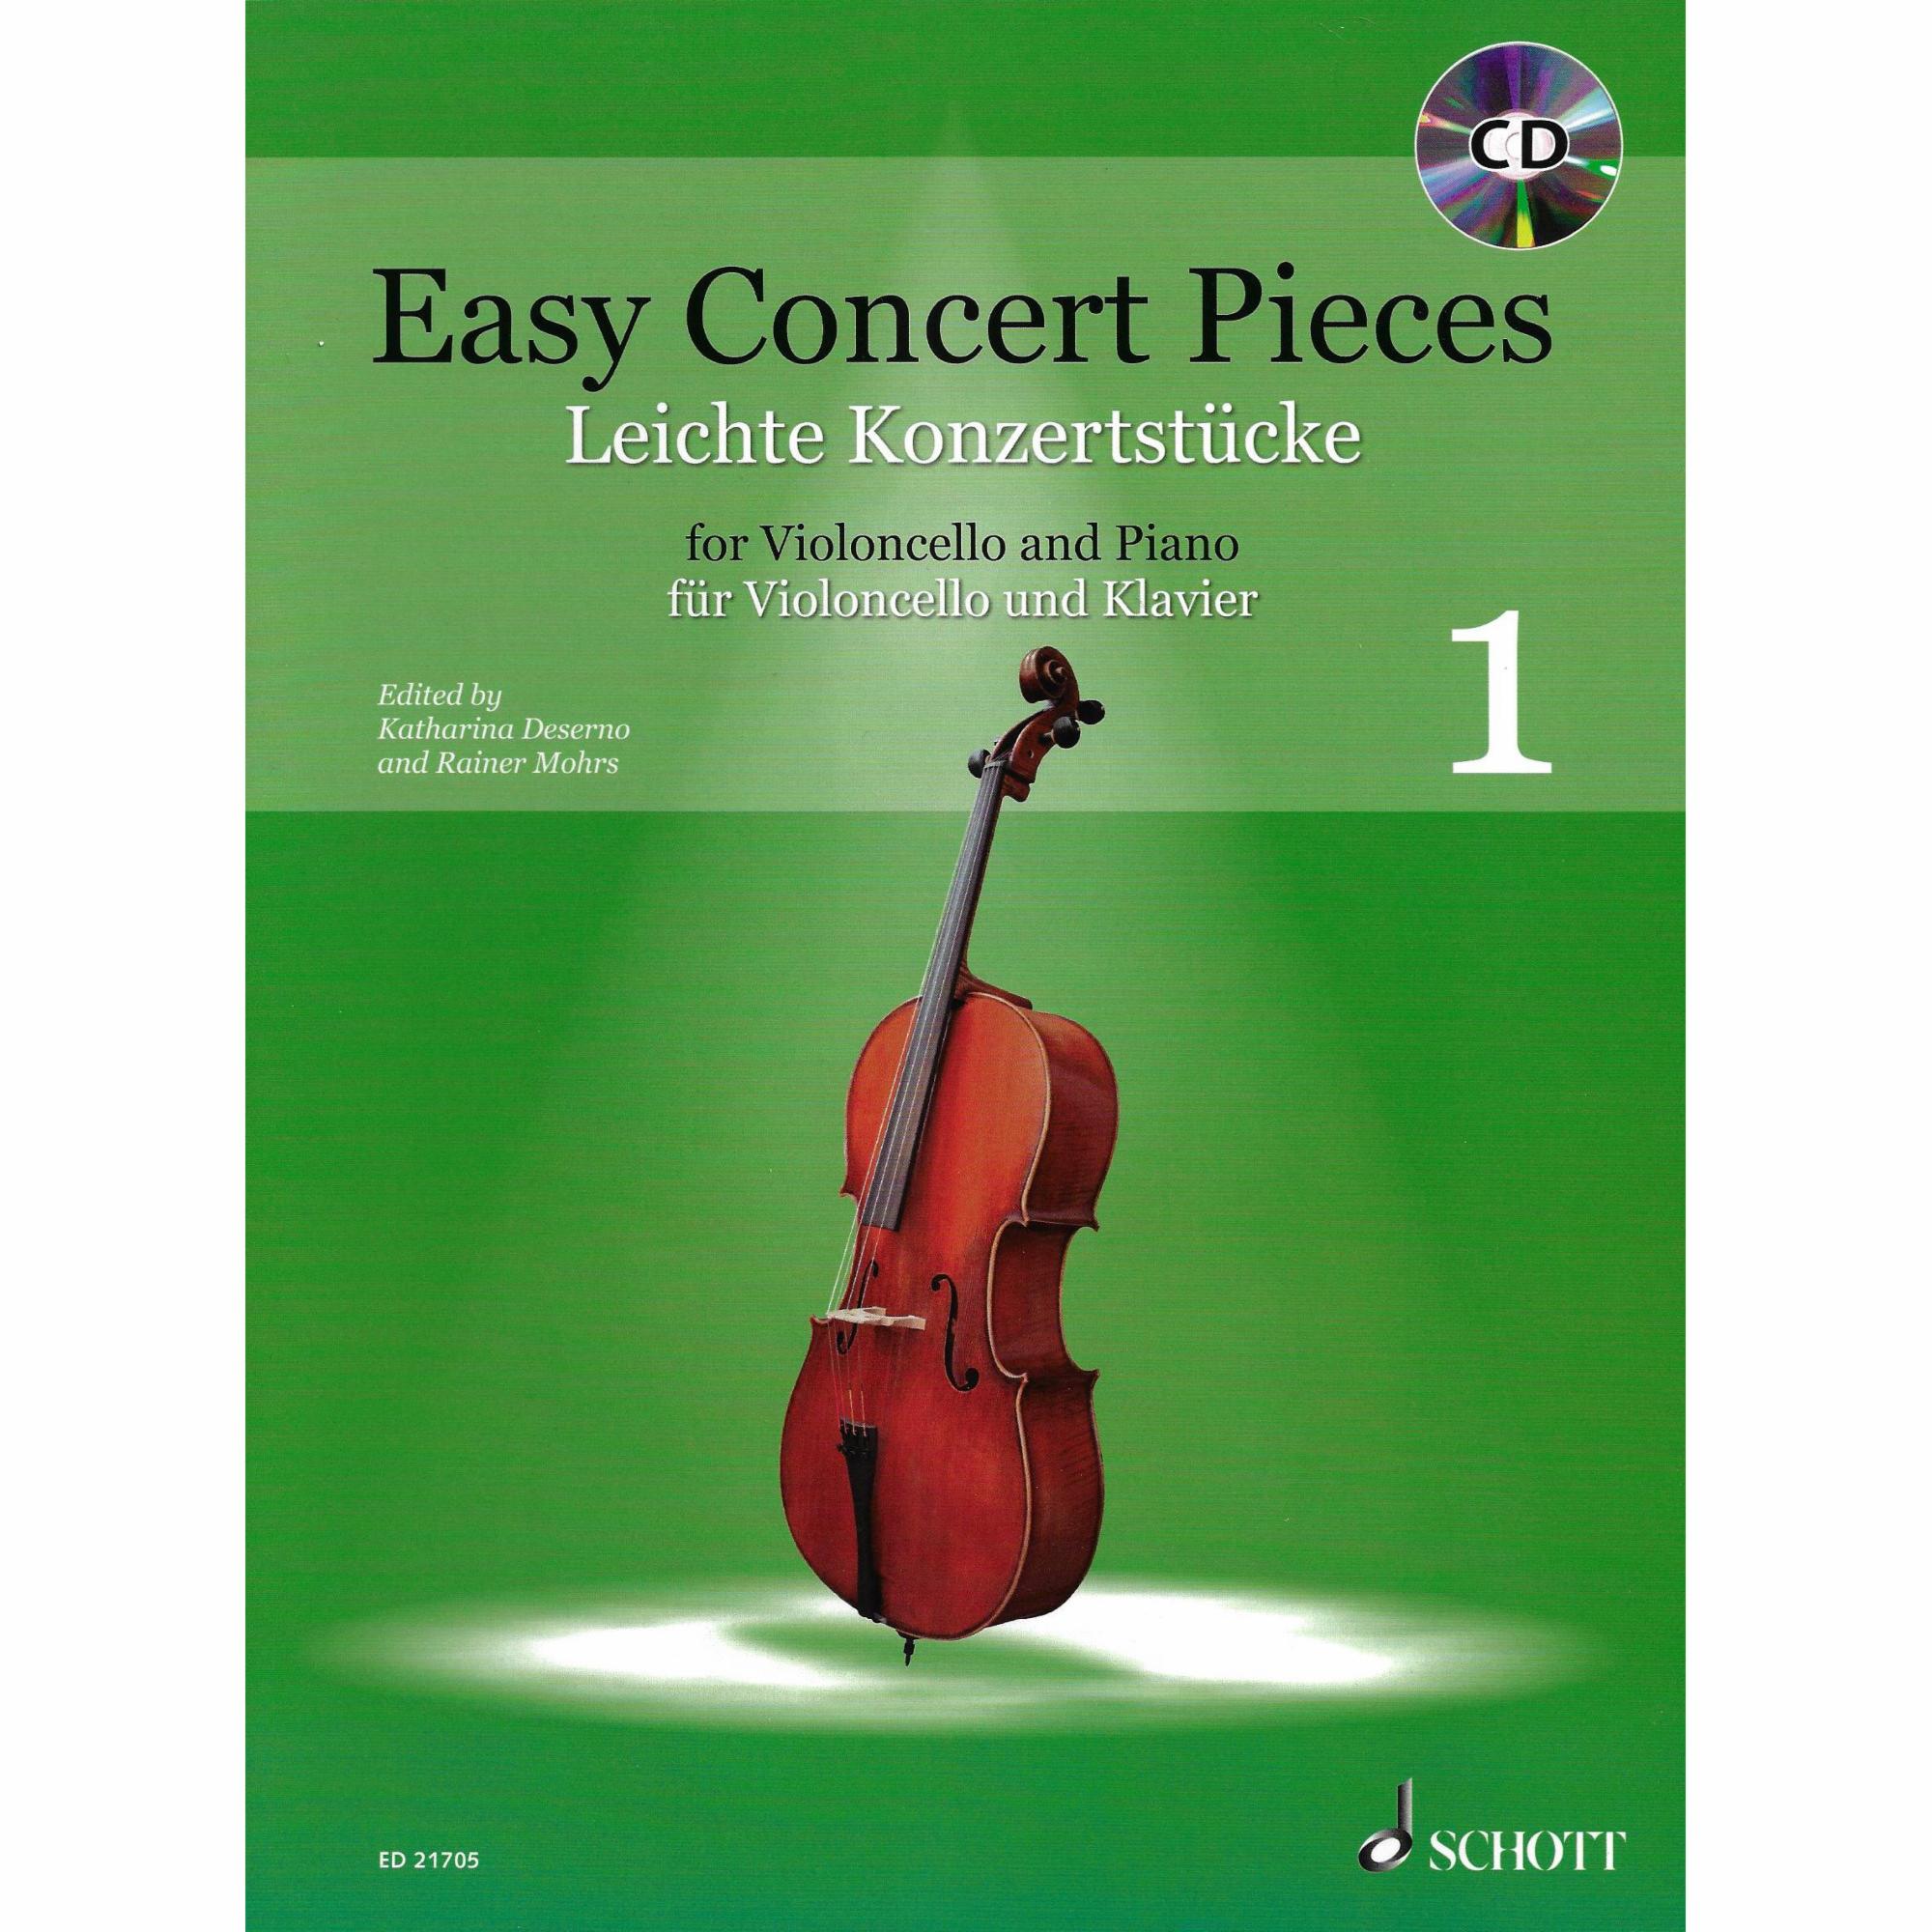 Easy Concert Pieces, Vols. 1-3 for Cello and Piano